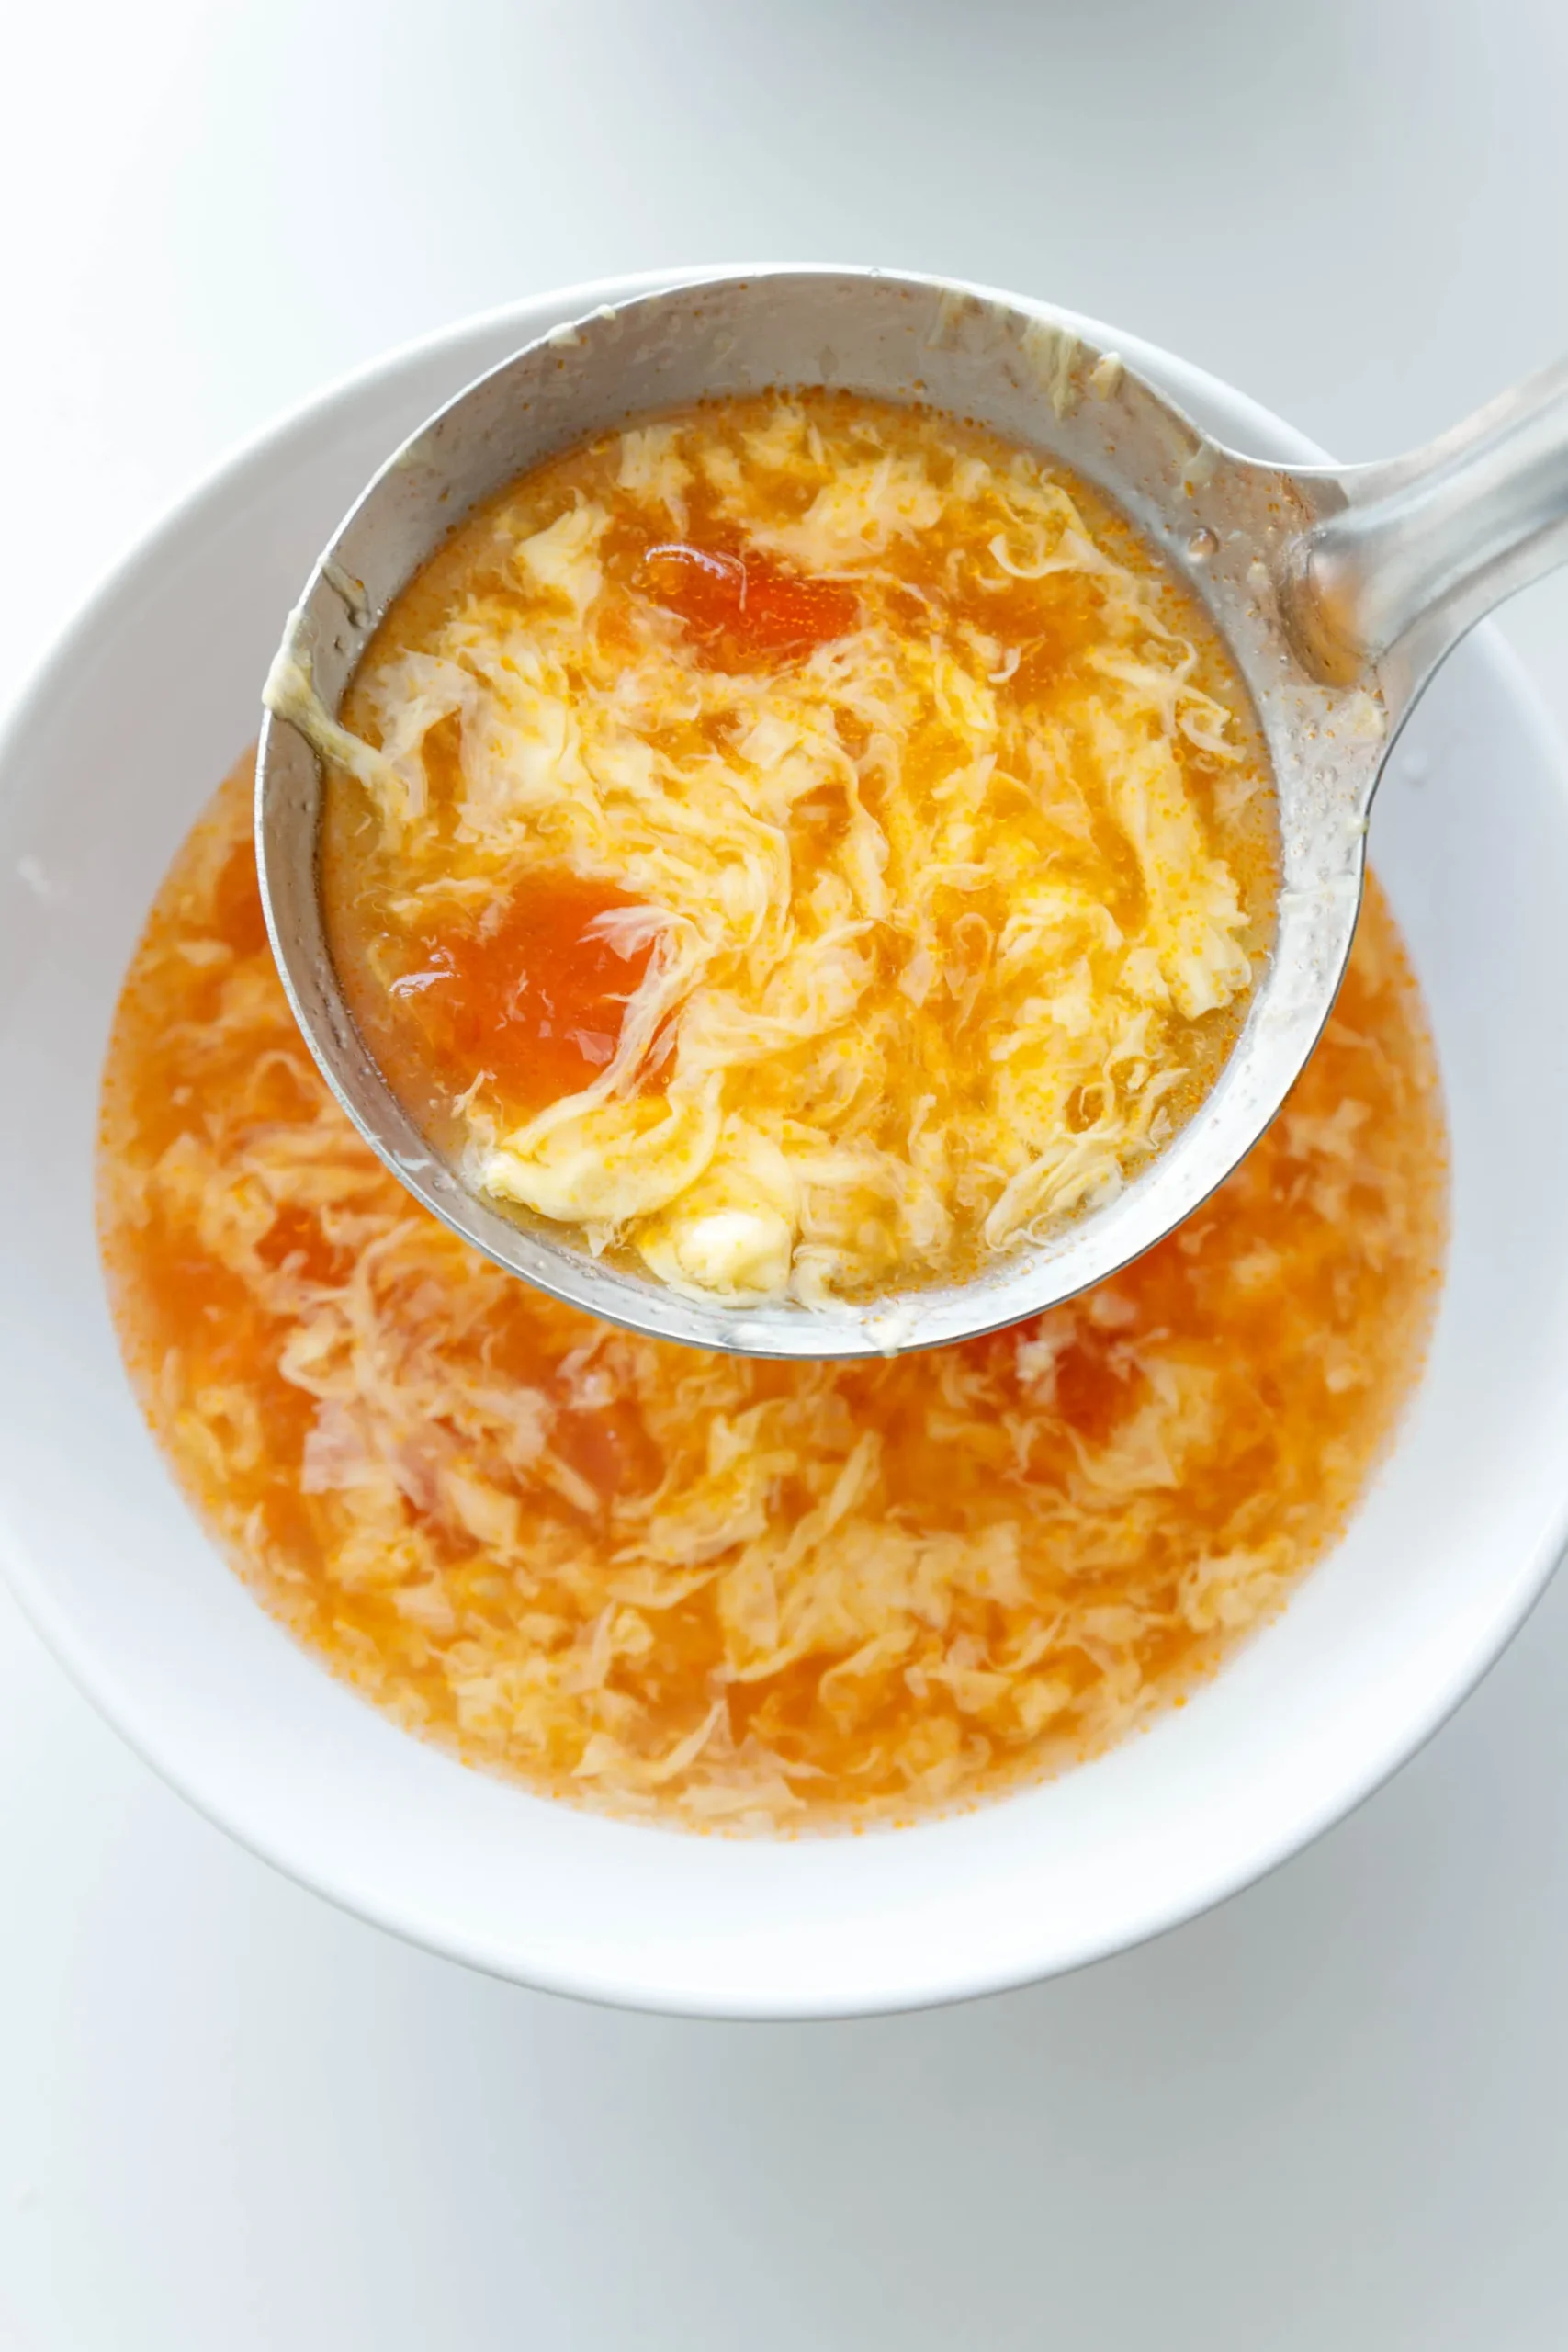 tomato and egg drop soup|chinasichuanfood.com